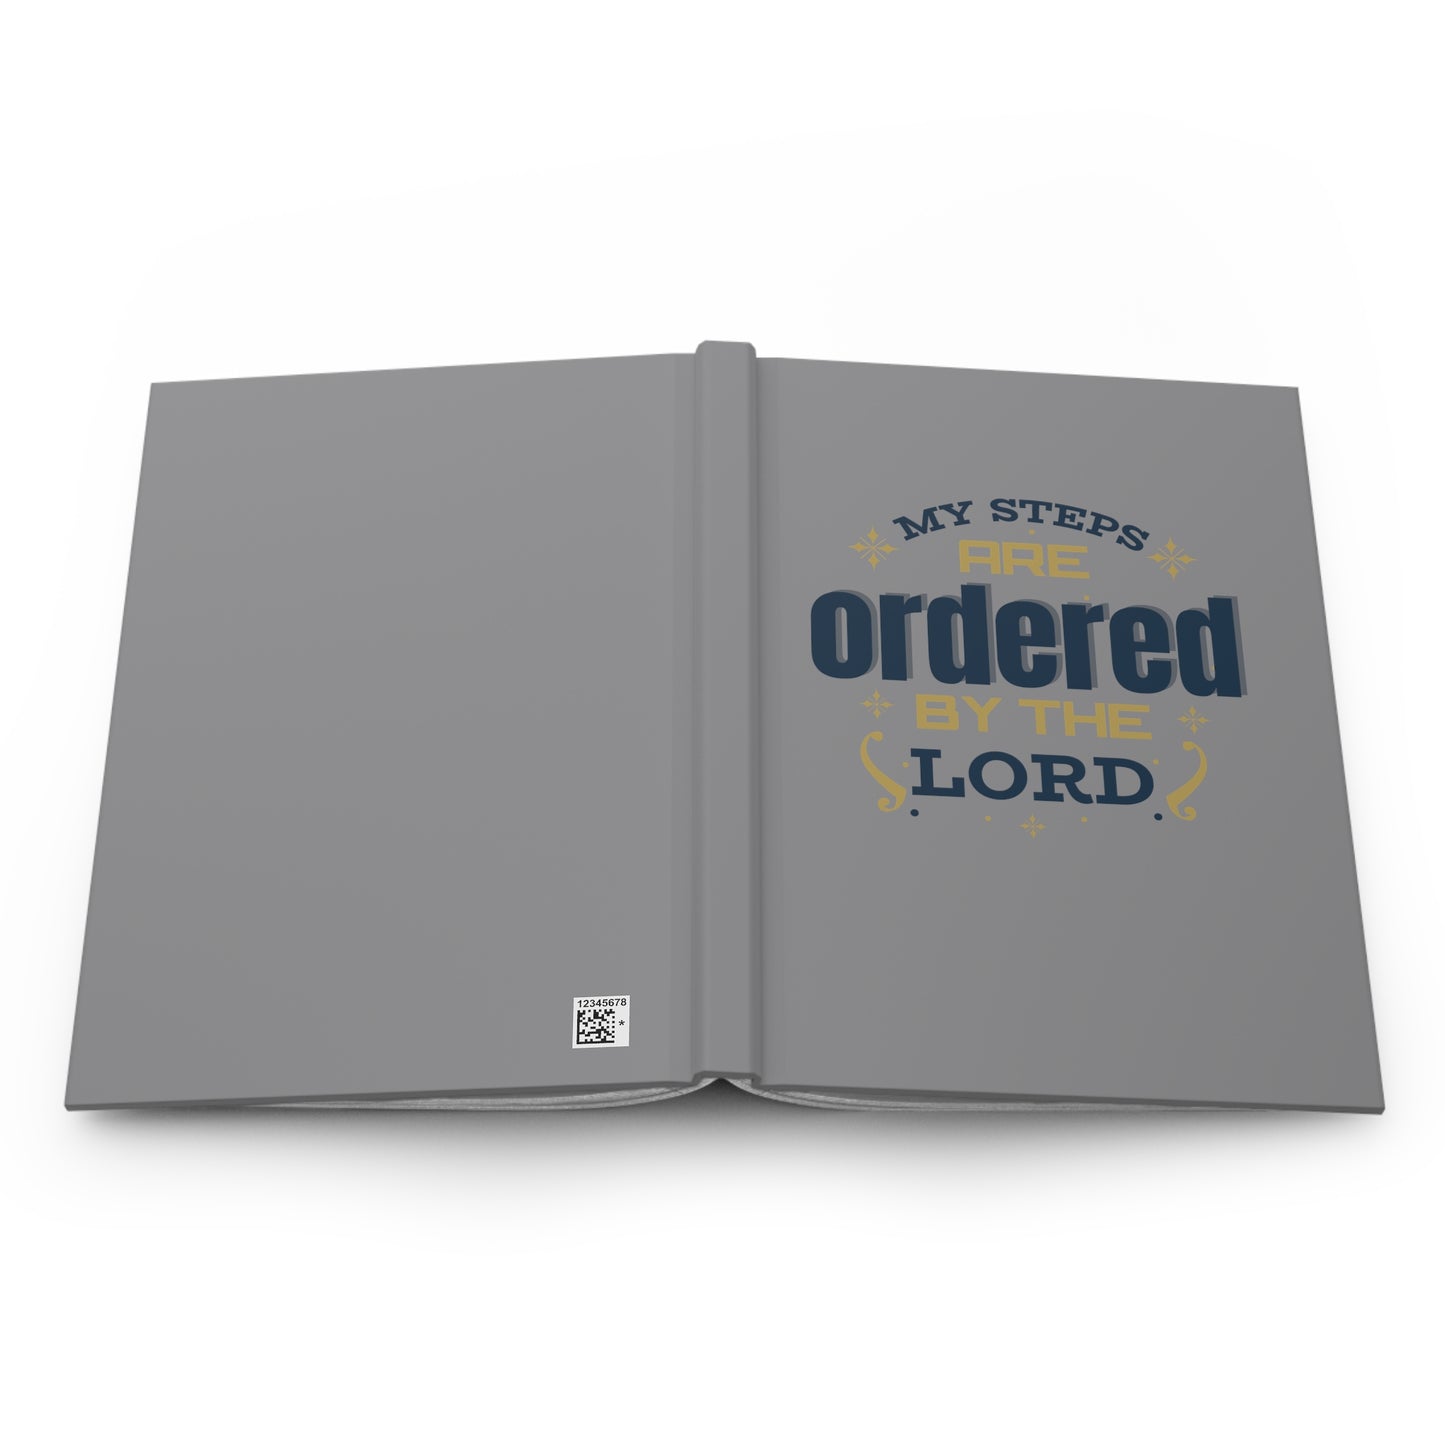 My Steps Are Ordered By The Lord Hardcover Journal Matte